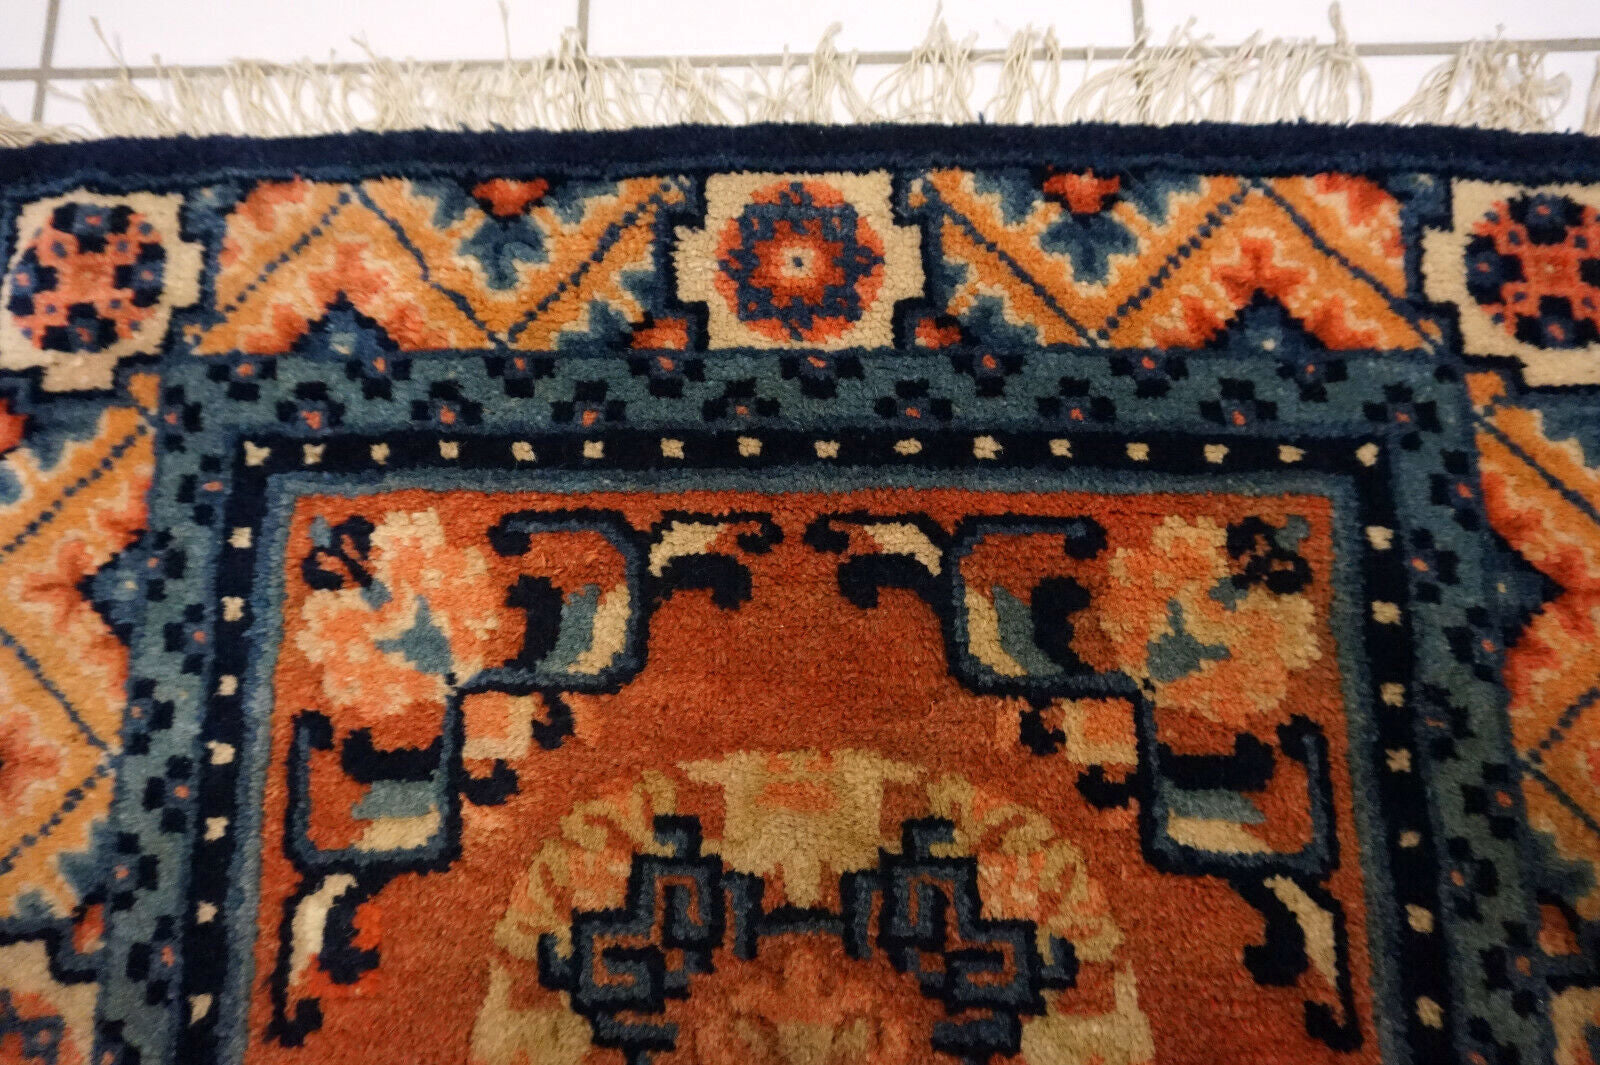 Detail of Ningsha Rug's Beige, Red, and Blue Hues - Chinese Cultural Heritage Piece